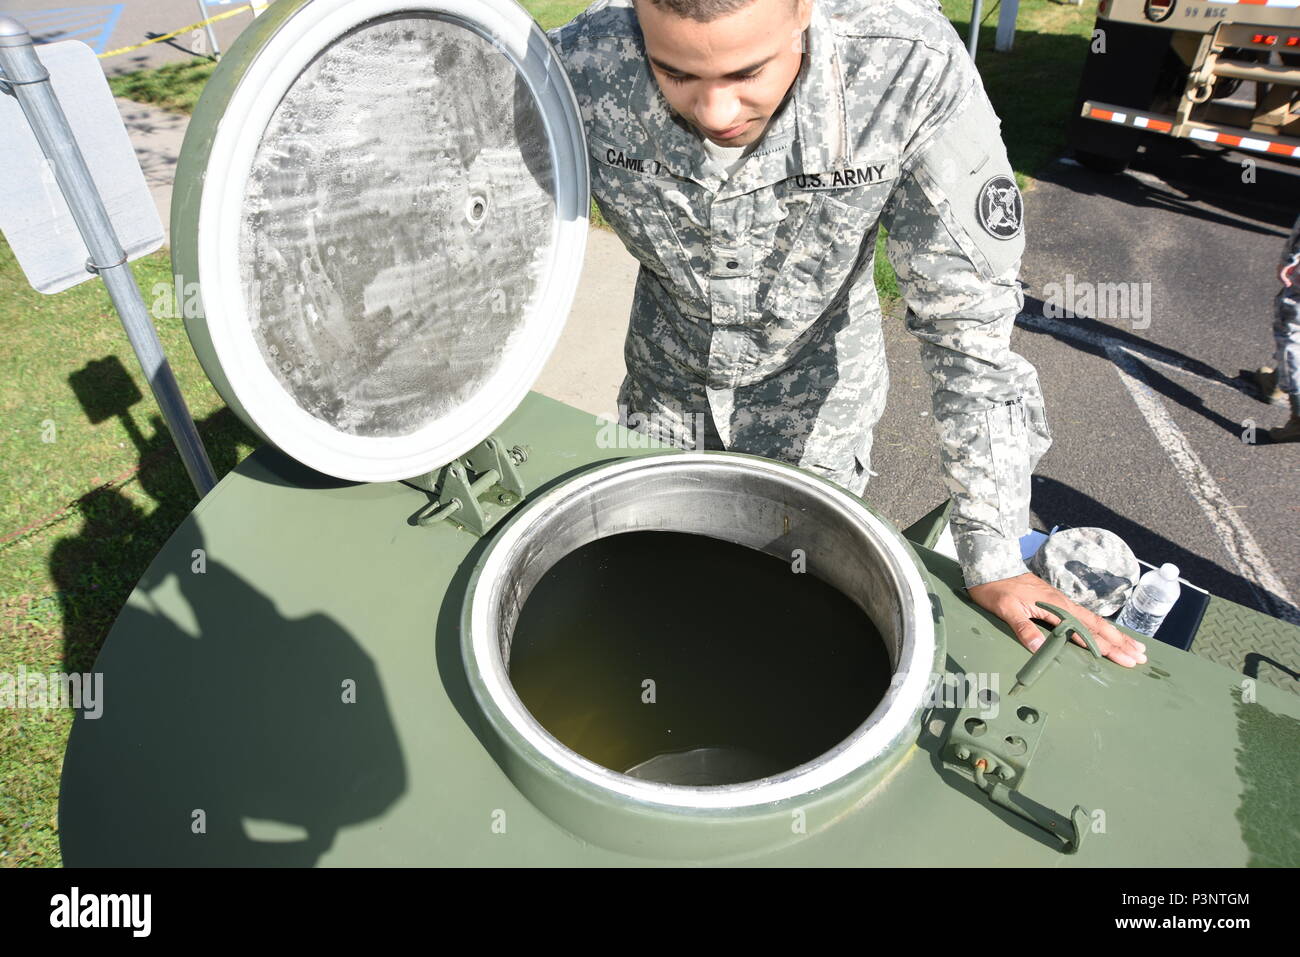 U.S Army Cadet Angel Camilo, training at the 48th Combat Support Hospital, confirms appropriate tank water levels during the Greater Chenango Cares Innovative Readiness Training mission July 19, 2016, in Norwich, N.Y. More than 190 Air Force, Navy, and Army personnel participated in the 10-day operation, offering medical, dental, optometry, and veterinary assistance.  (U.S. Air National Guard photo by Senior Master Sgt. Elizabeth Gilbert) Stock Photo